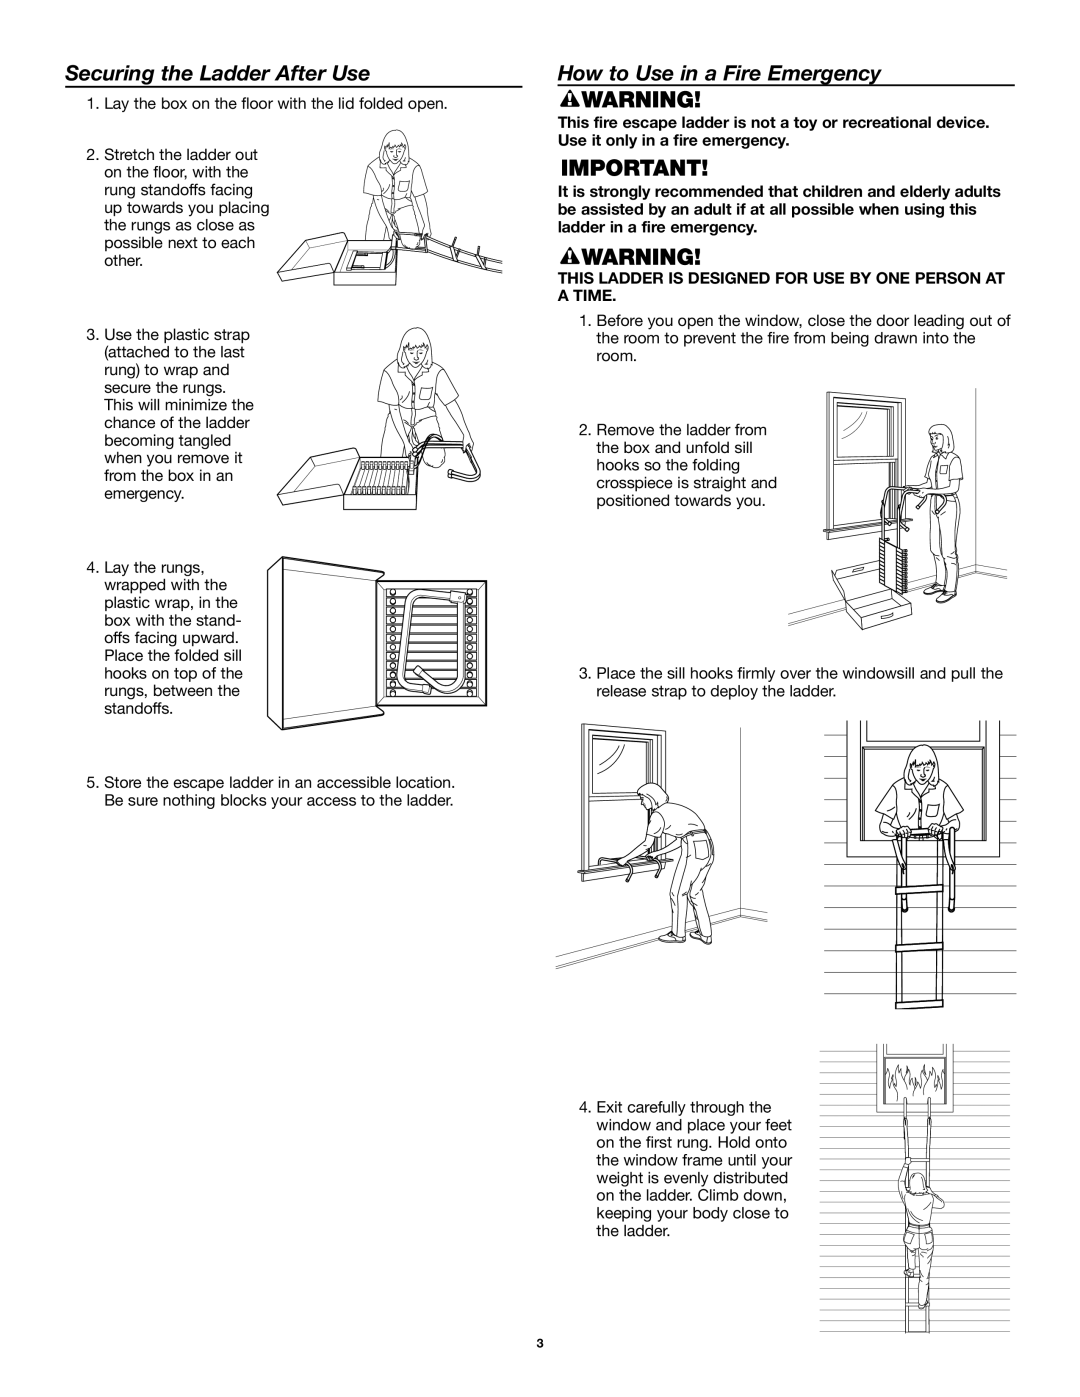 BRK electronic EL52 user manual Securing the Ladder After Use, How to Use in a Fire Emergency, Atime 